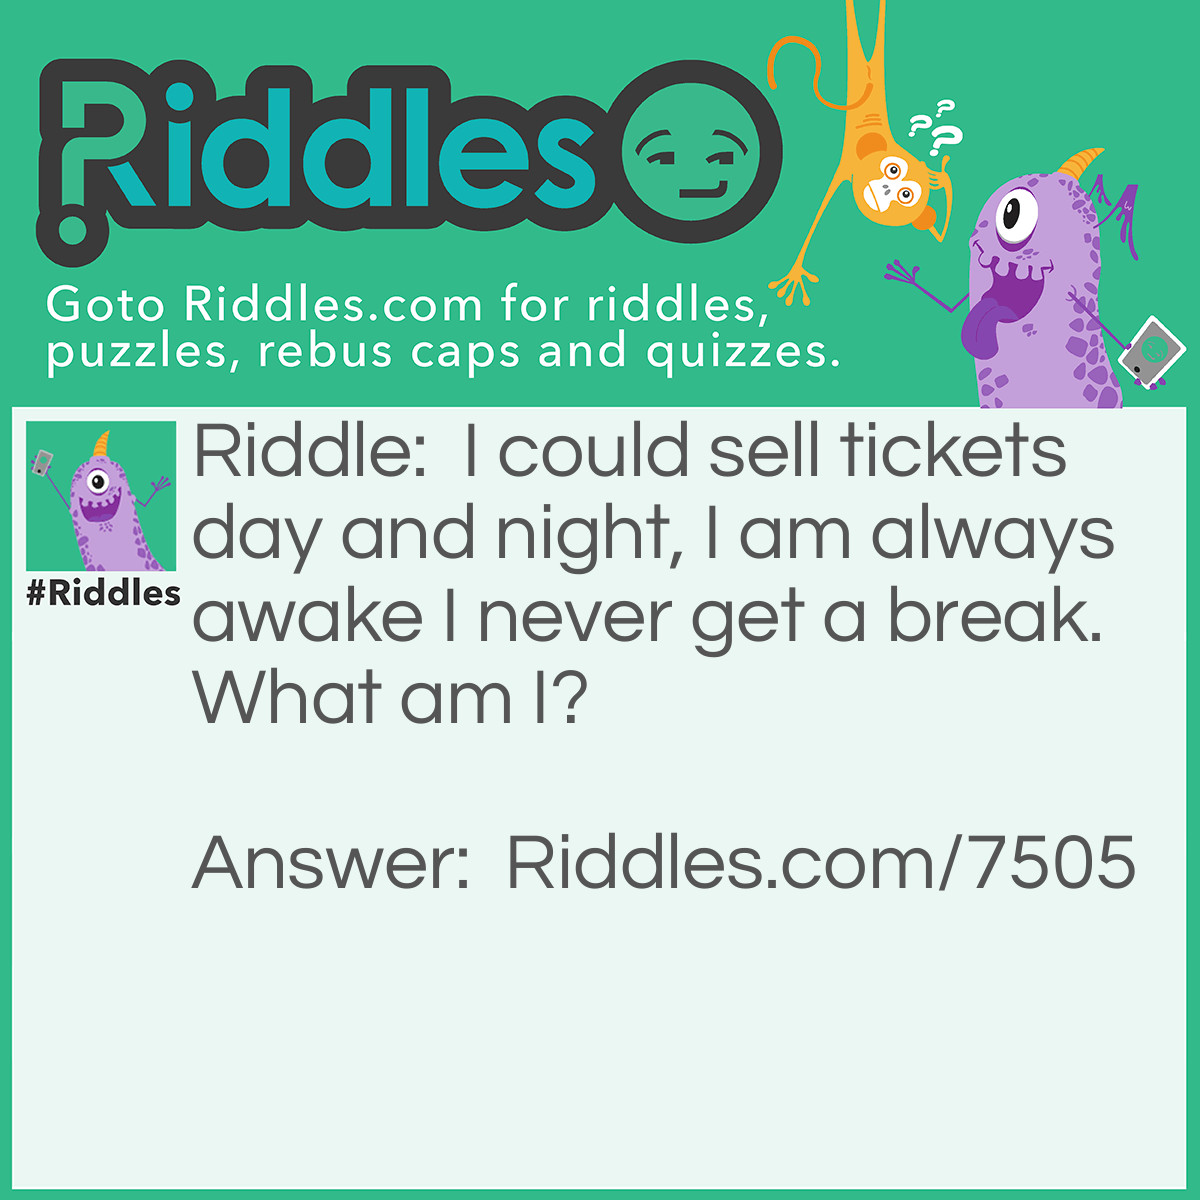 Riddle: I could sell tickets day and night, I am always awake I never get a break. What am I? Answer: I don’t know.